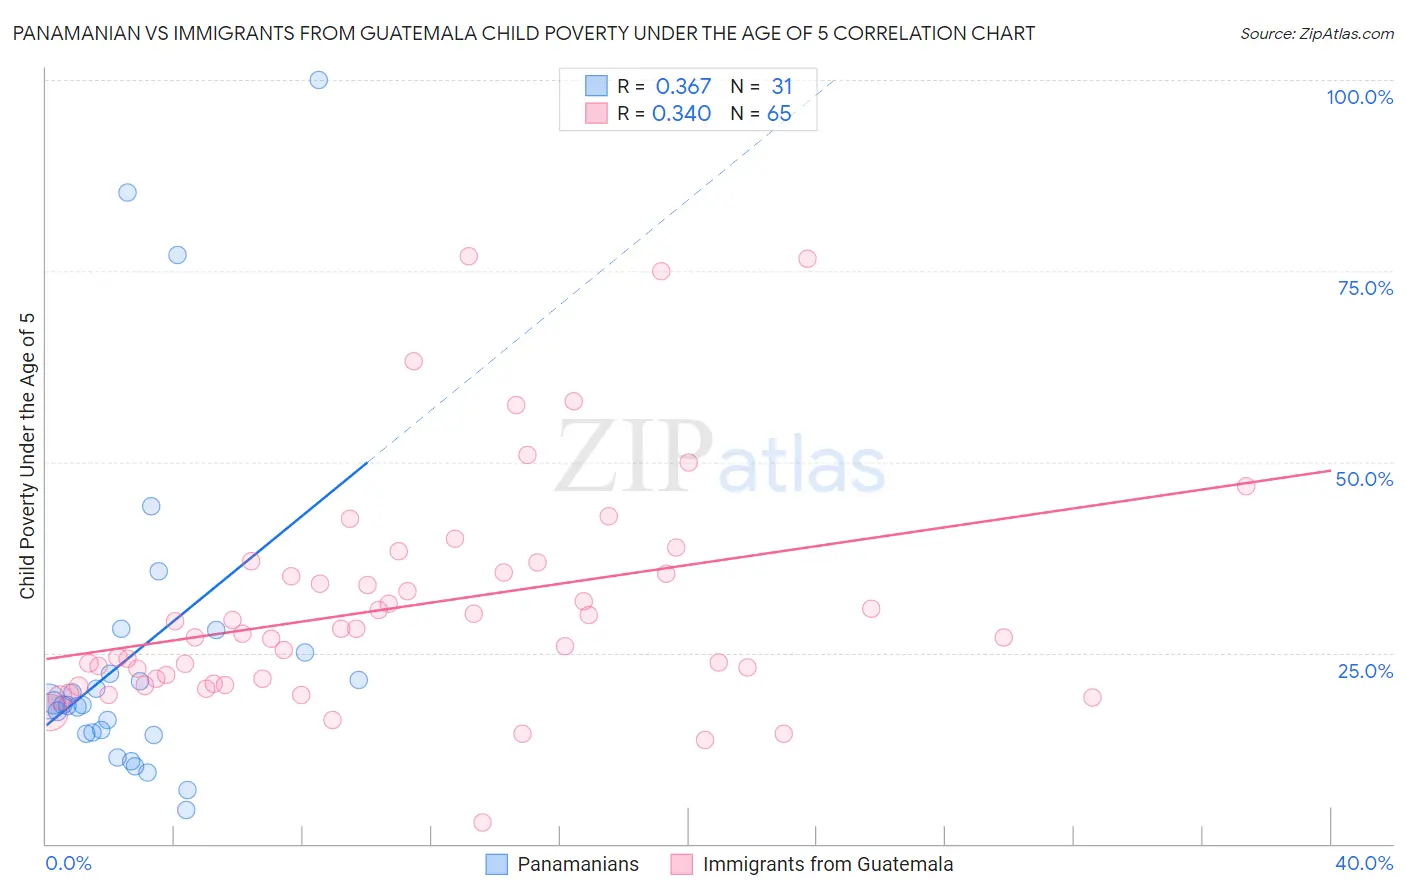 Panamanian vs Immigrants from Guatemala Child Poverty Under the Age of 5